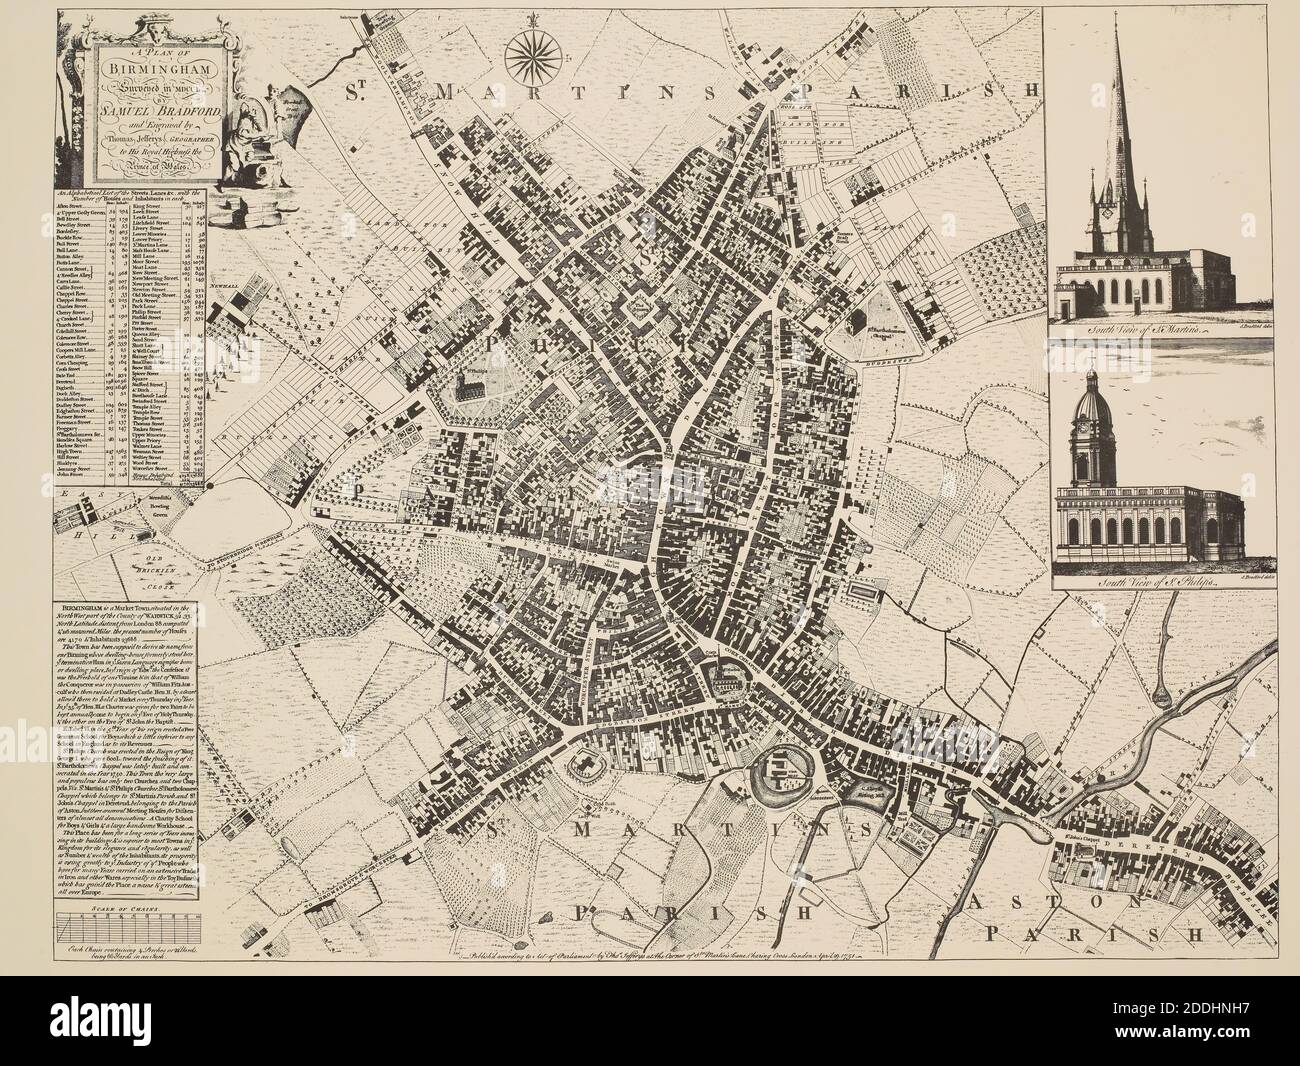 A Plan of Birmingham Surveyed in 1750 Drawn by: Samuel Bradford Engraver: T. Jefferys, South view of St Martin's Church & south view of St Philip's Church inset to top right., Topographical Views, Printing, Engraving, Birmingham history, Map, England, Midlands Stock Photo